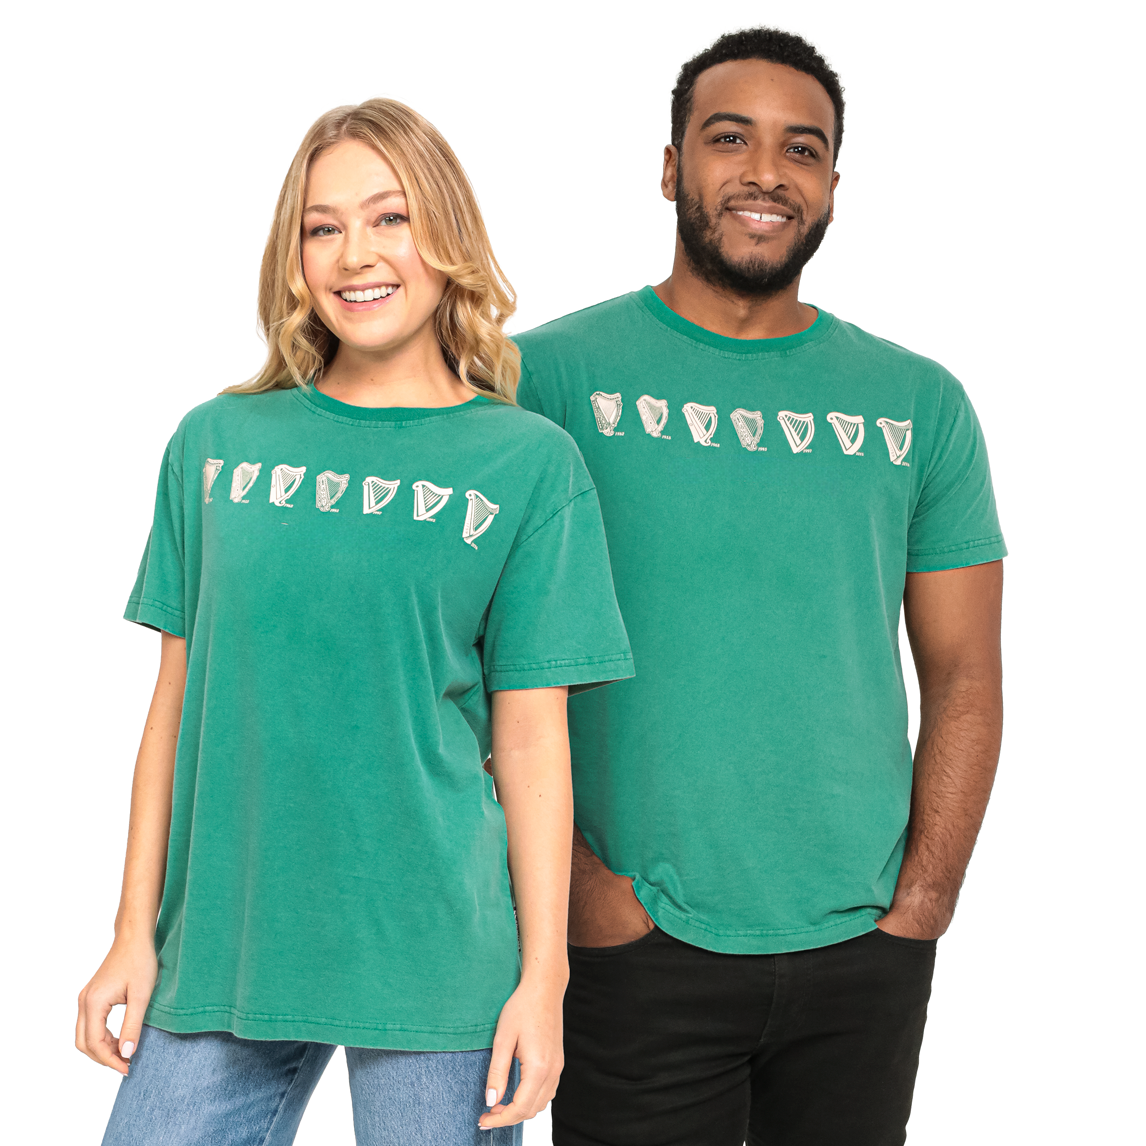 A man and a woman wearing Evolution Harp Green Tee t-shirts celebrating Guinness.